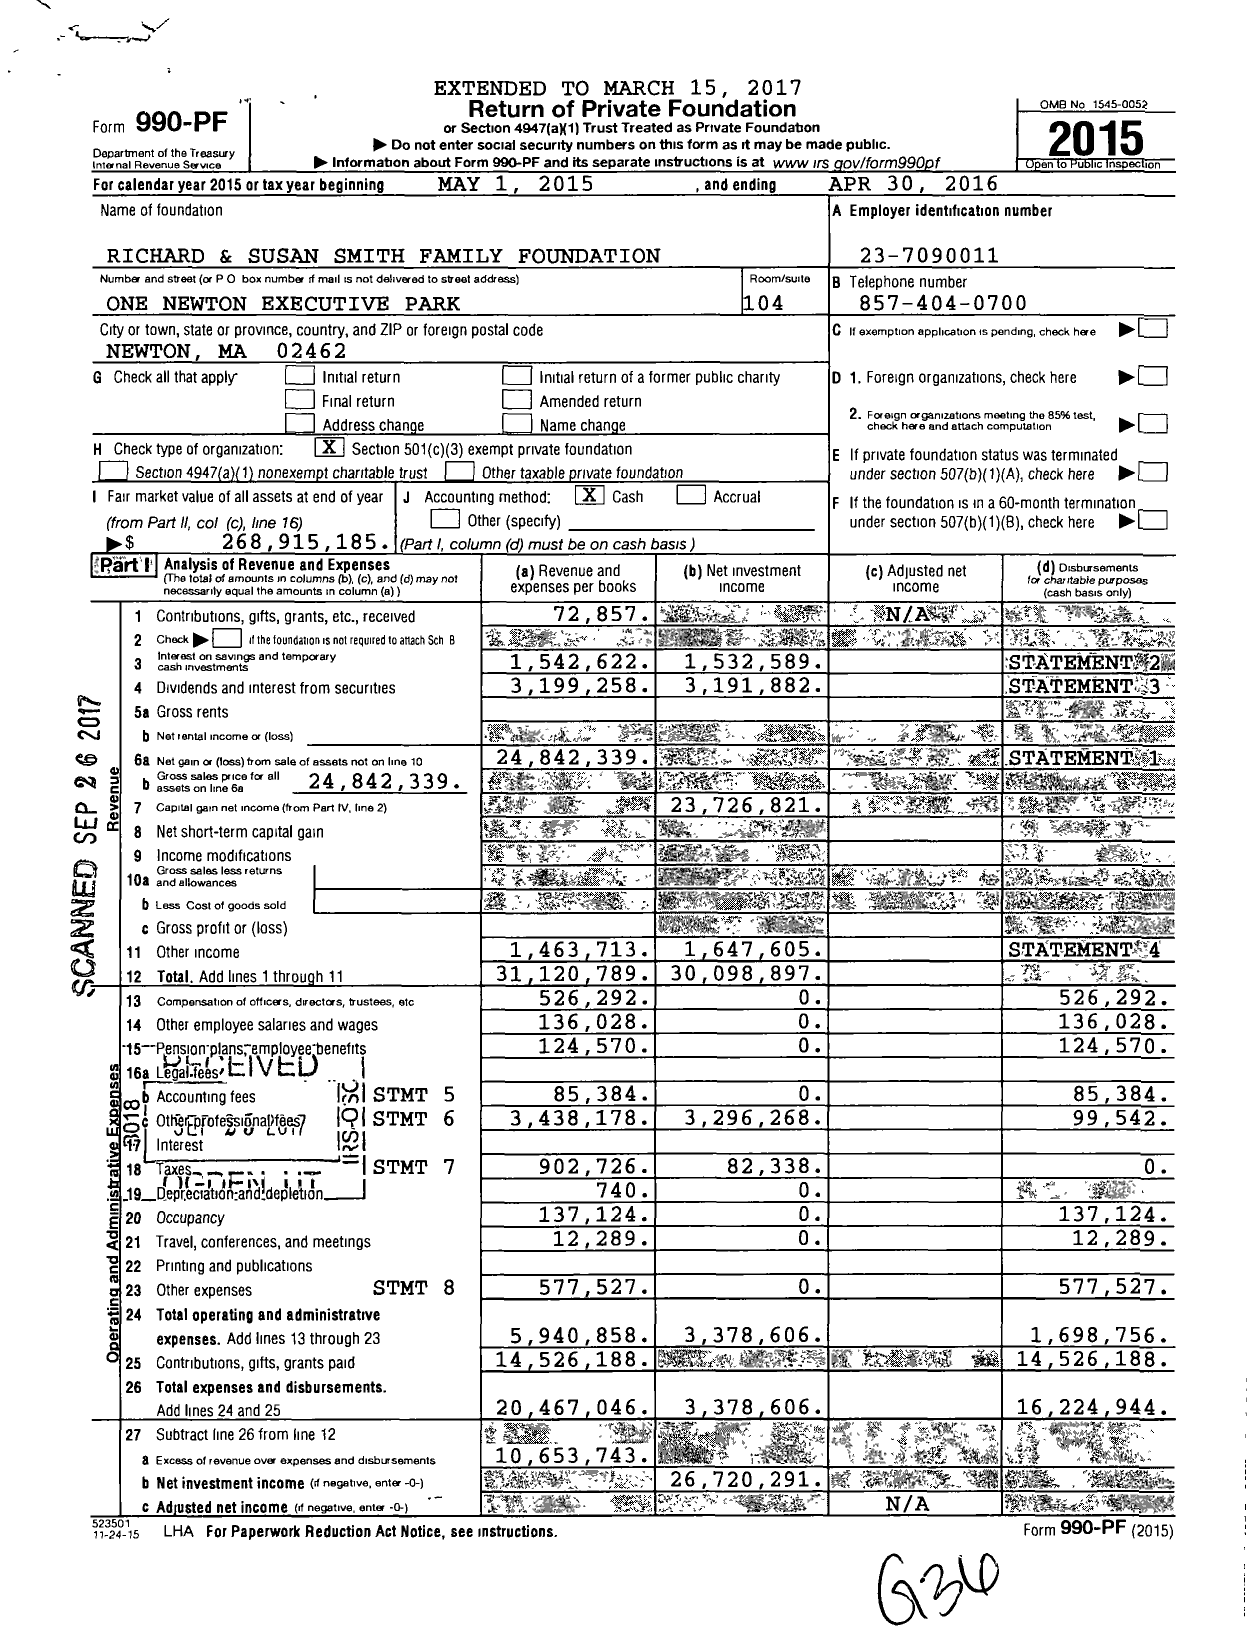 Image of first page of 2015 Form 990PF for Richard and Susan Smith Family Foundation